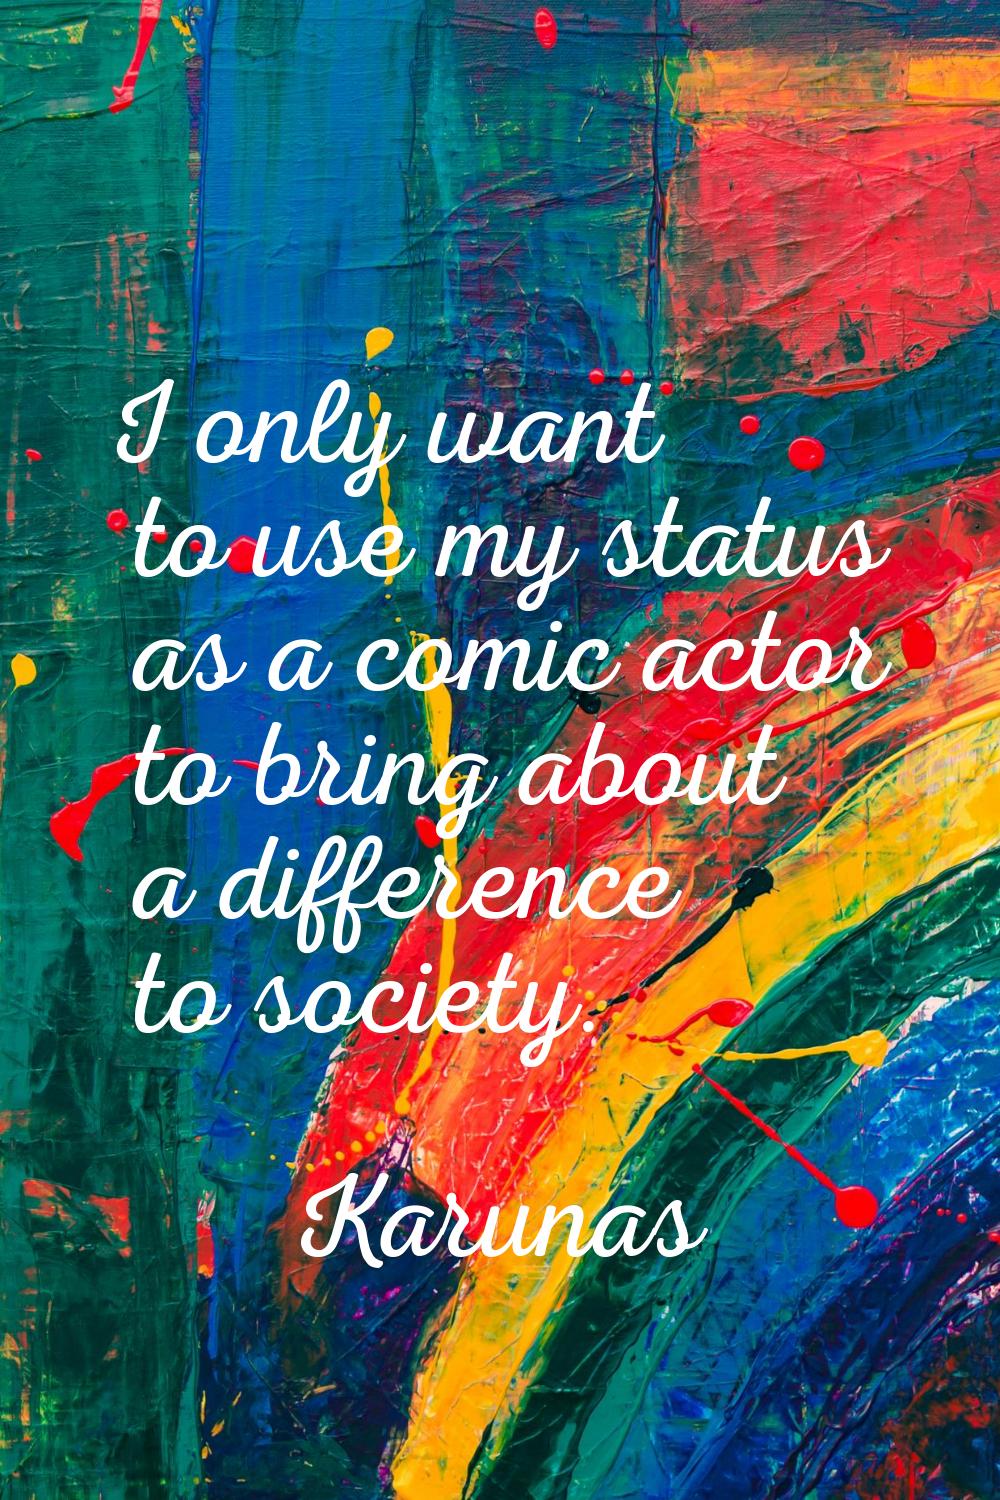 I only want to use my status as a comic actor to bring about a difference to society.